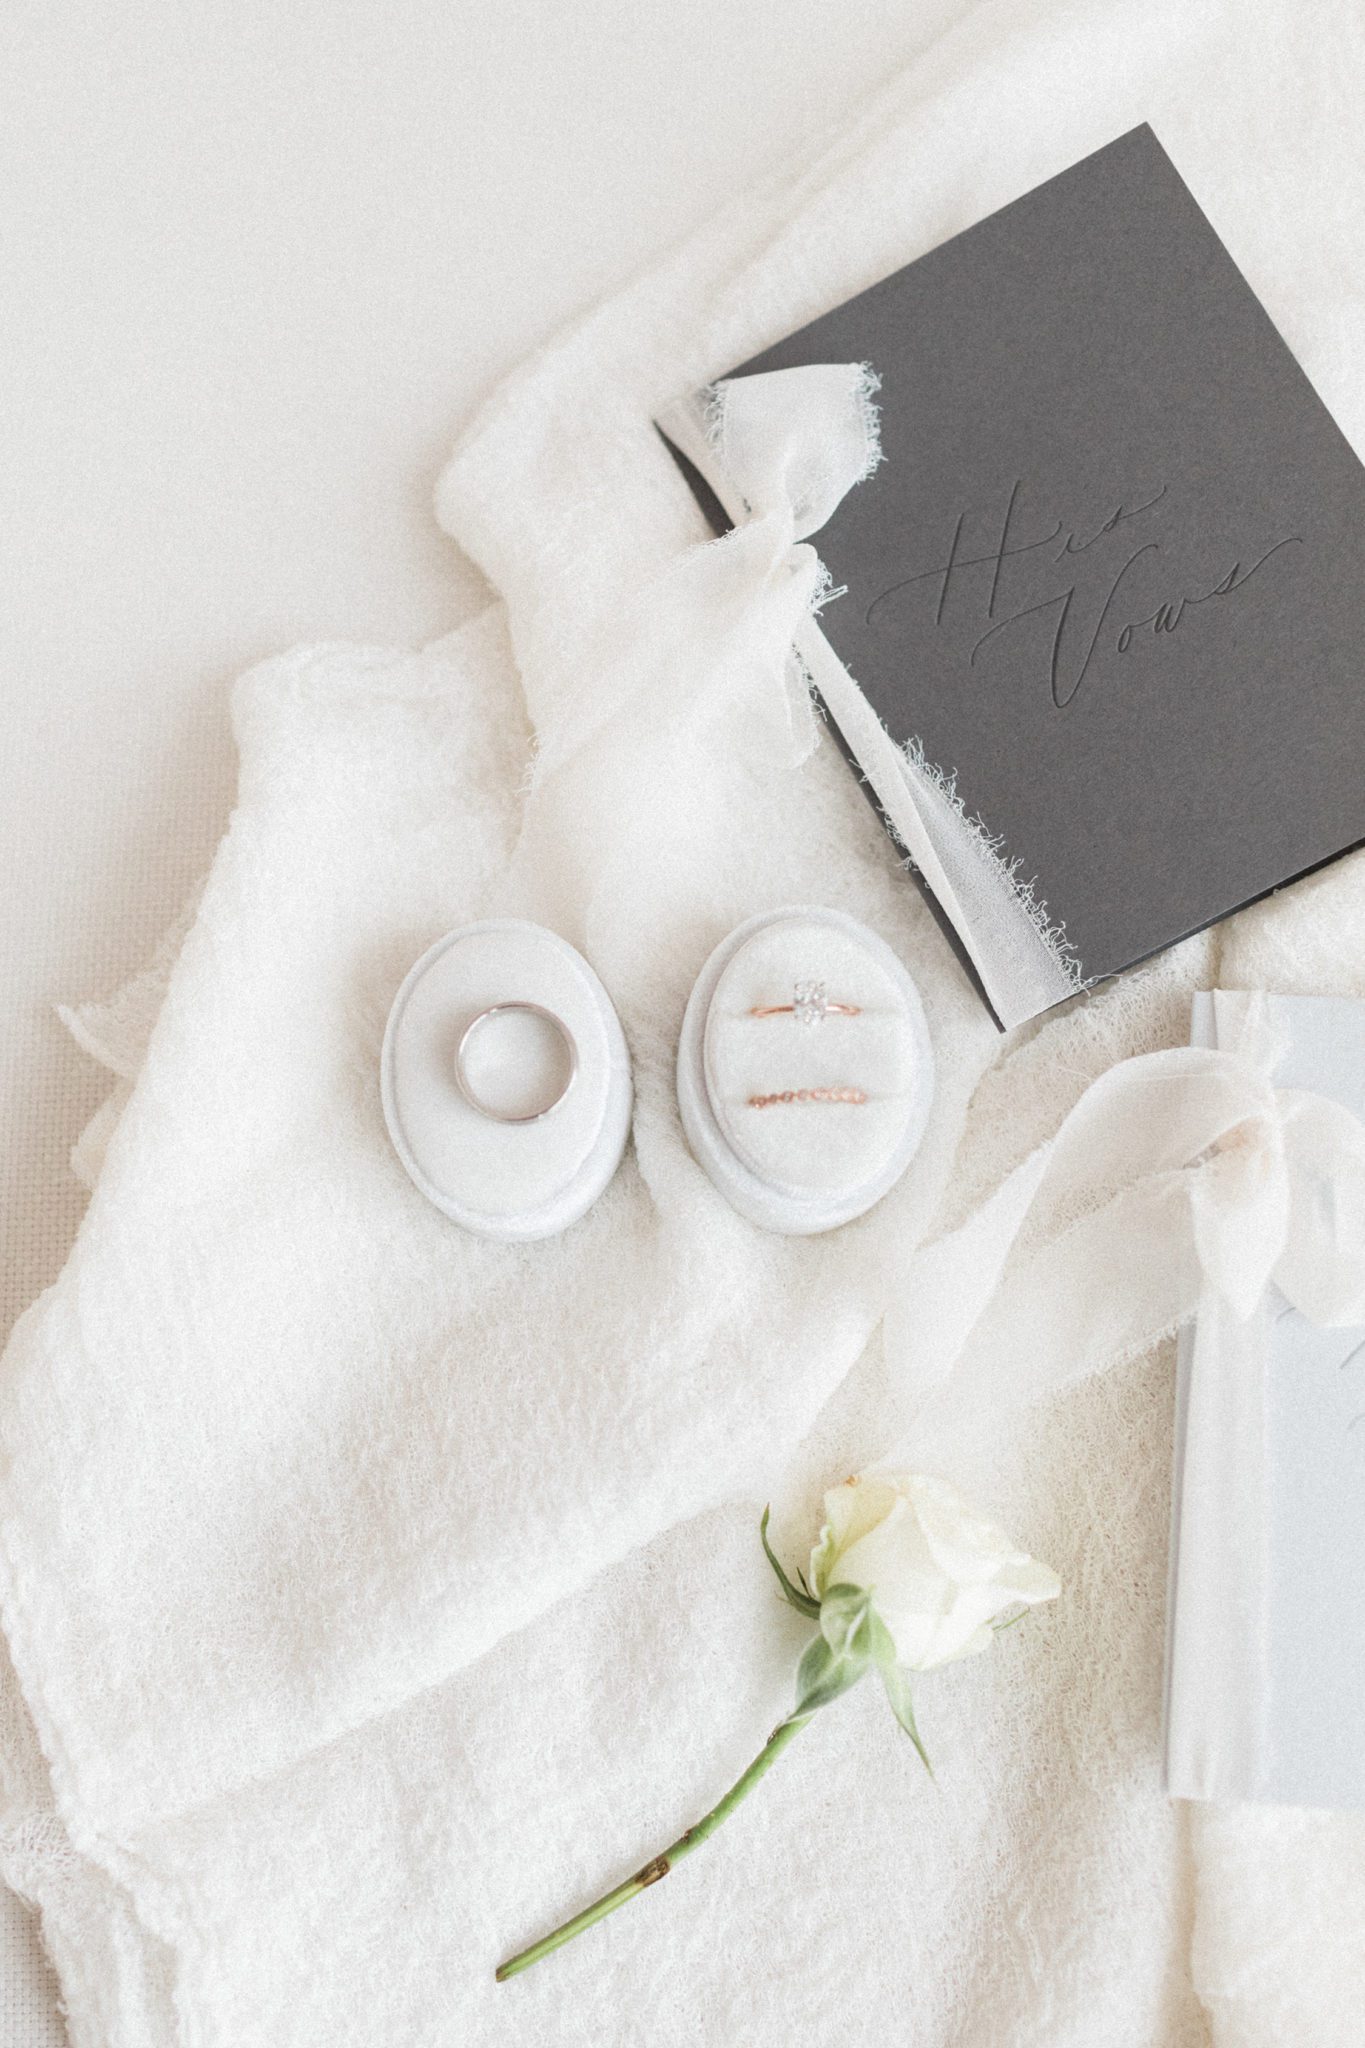 Monochromatic wedding inspiration with a white velvet ring box and charcoal vow books